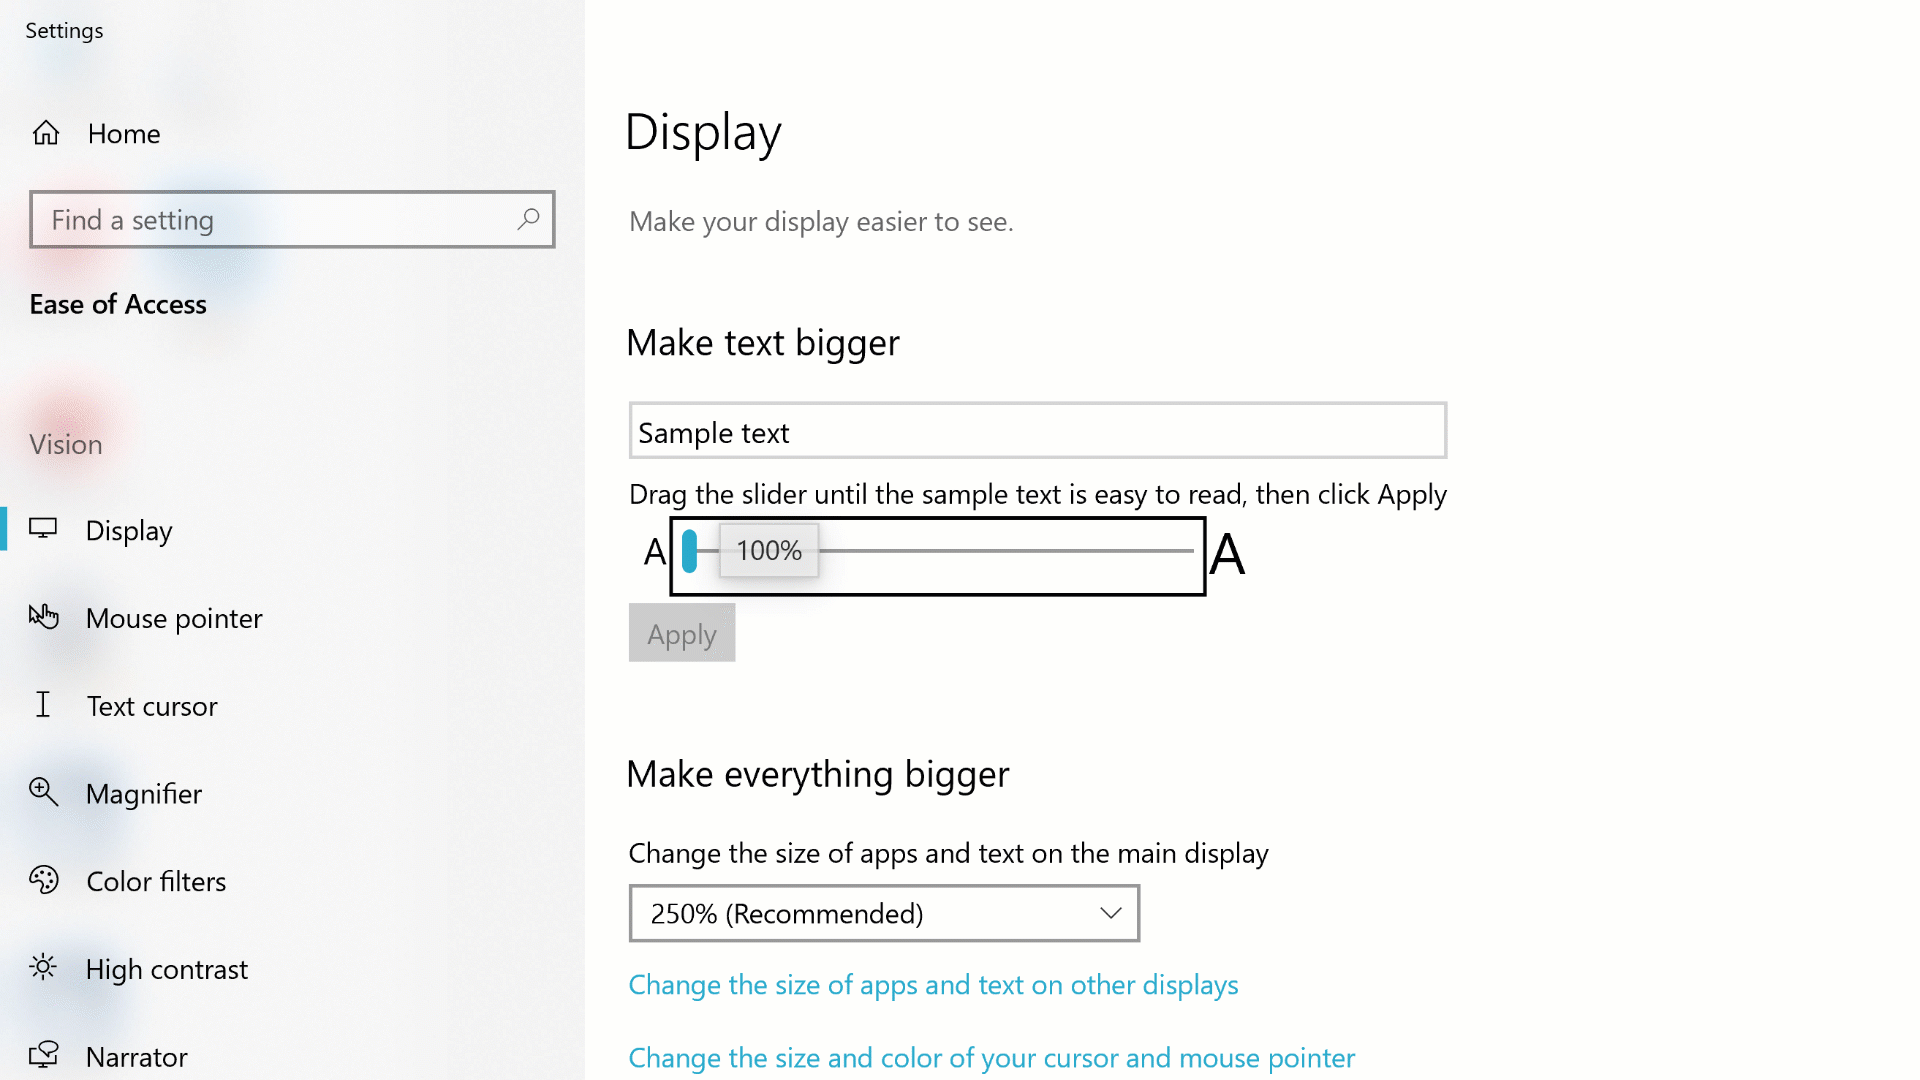 Animated GIF showing the Vision - Display settings in the Windows Ease of Access Center.